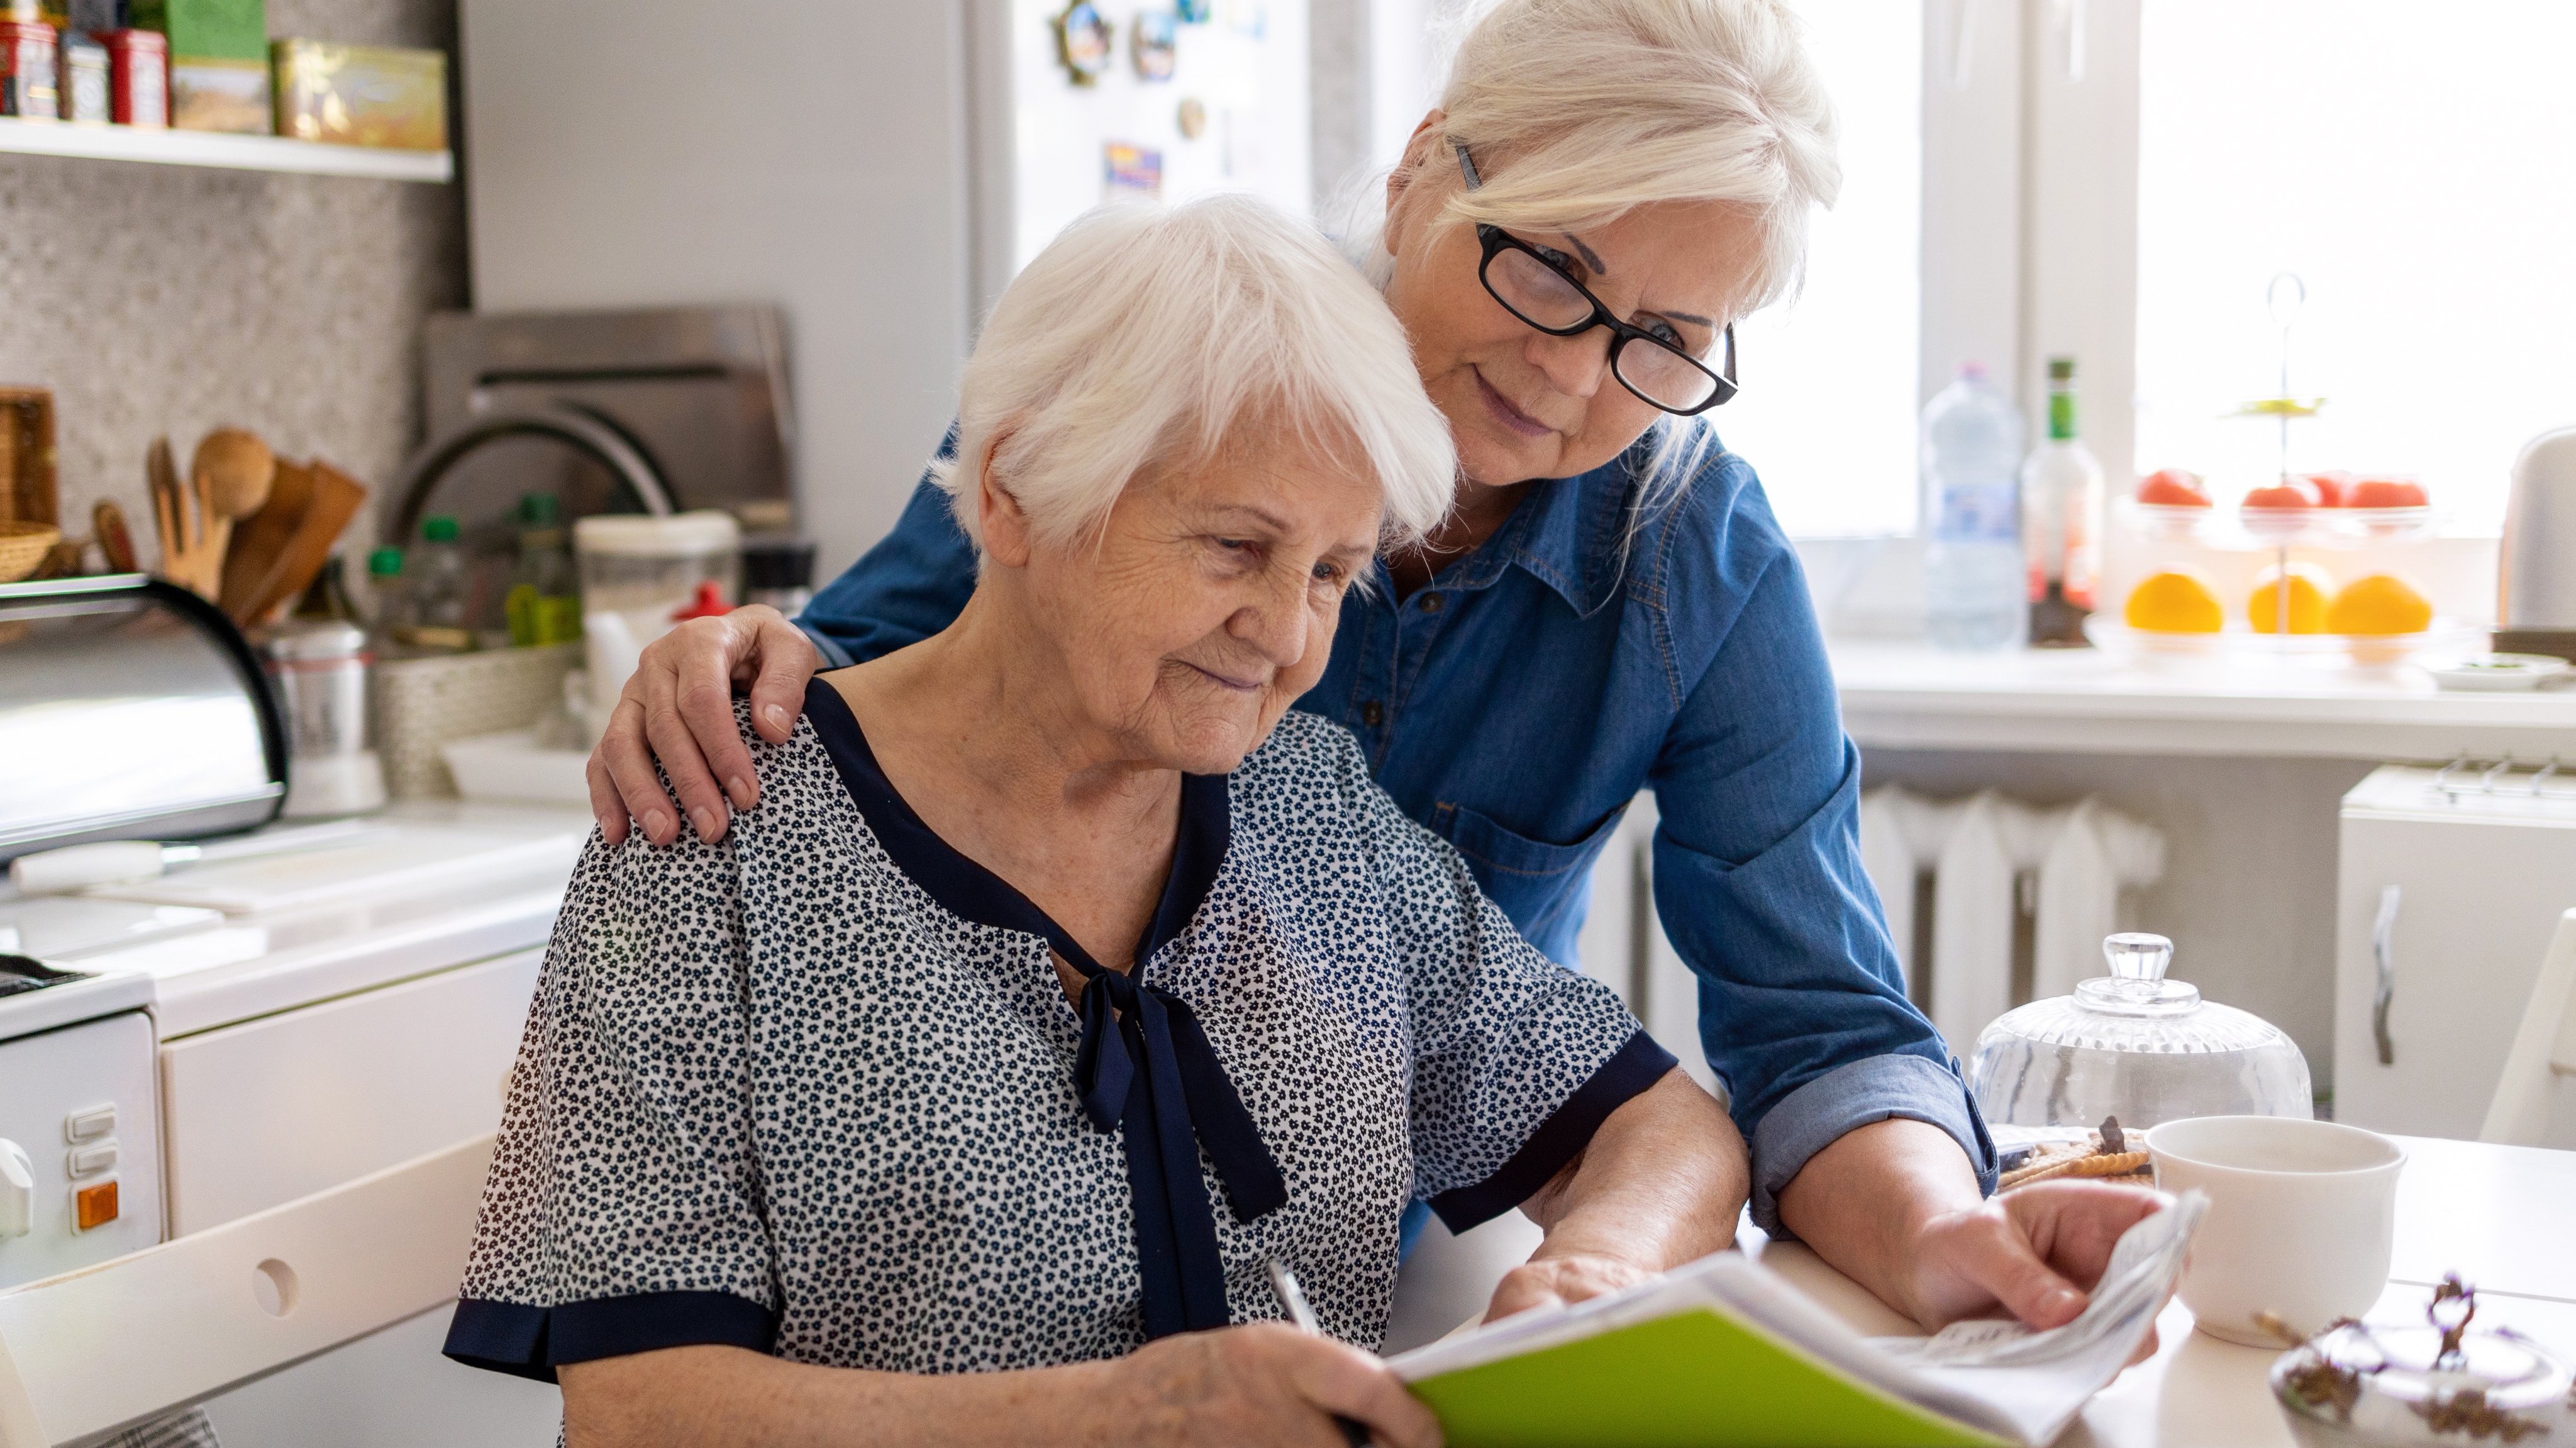 Two older adults reviewing financial documents together